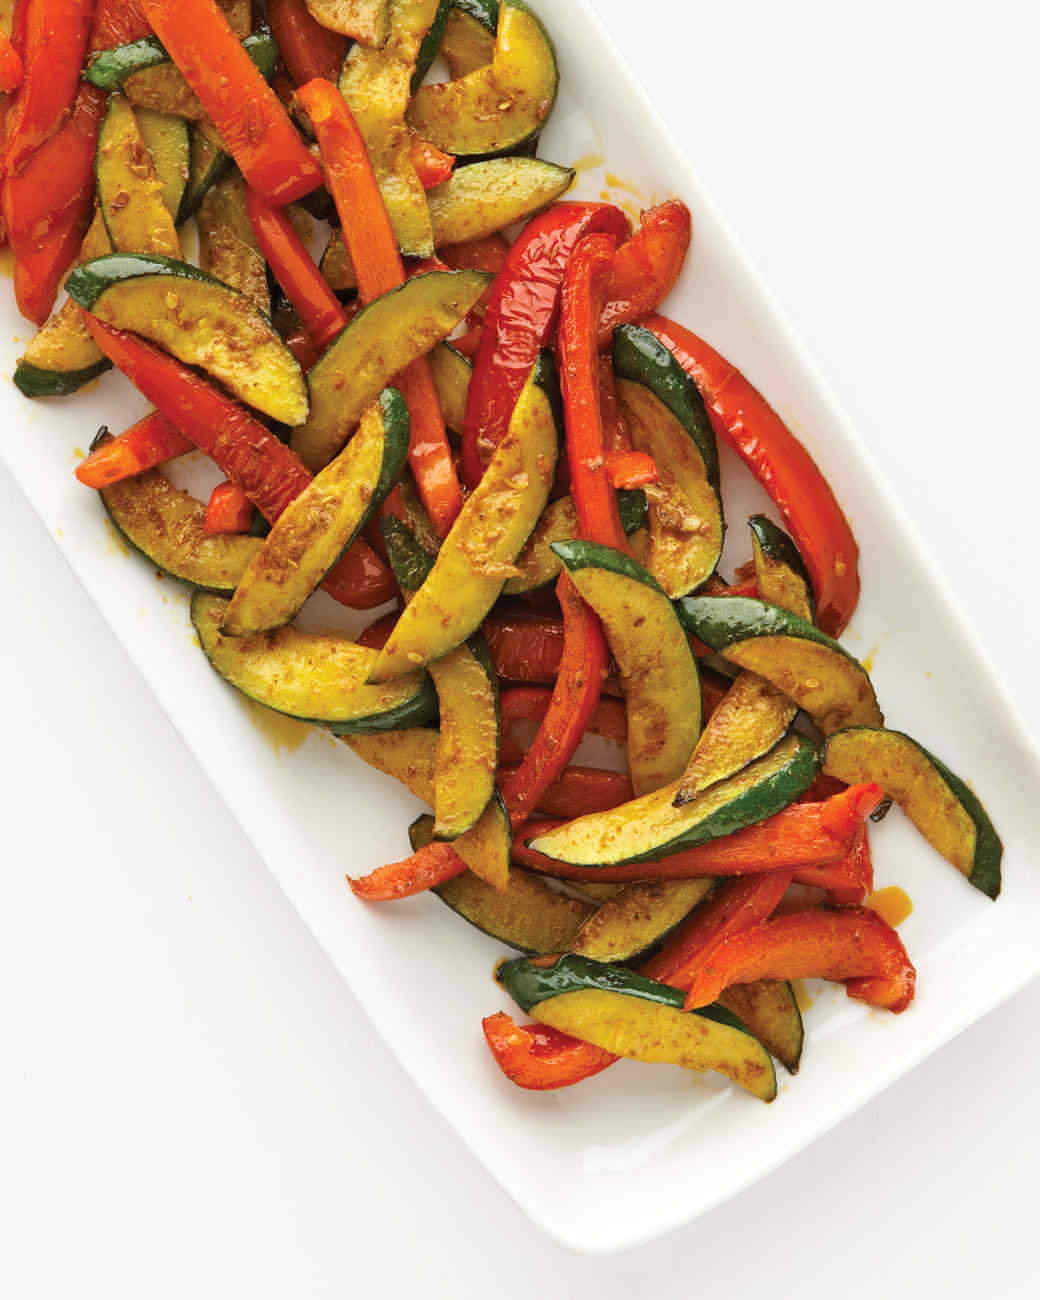 25 Bell Pepper Recipes That Make the Most of This Colorful Veg | Martha